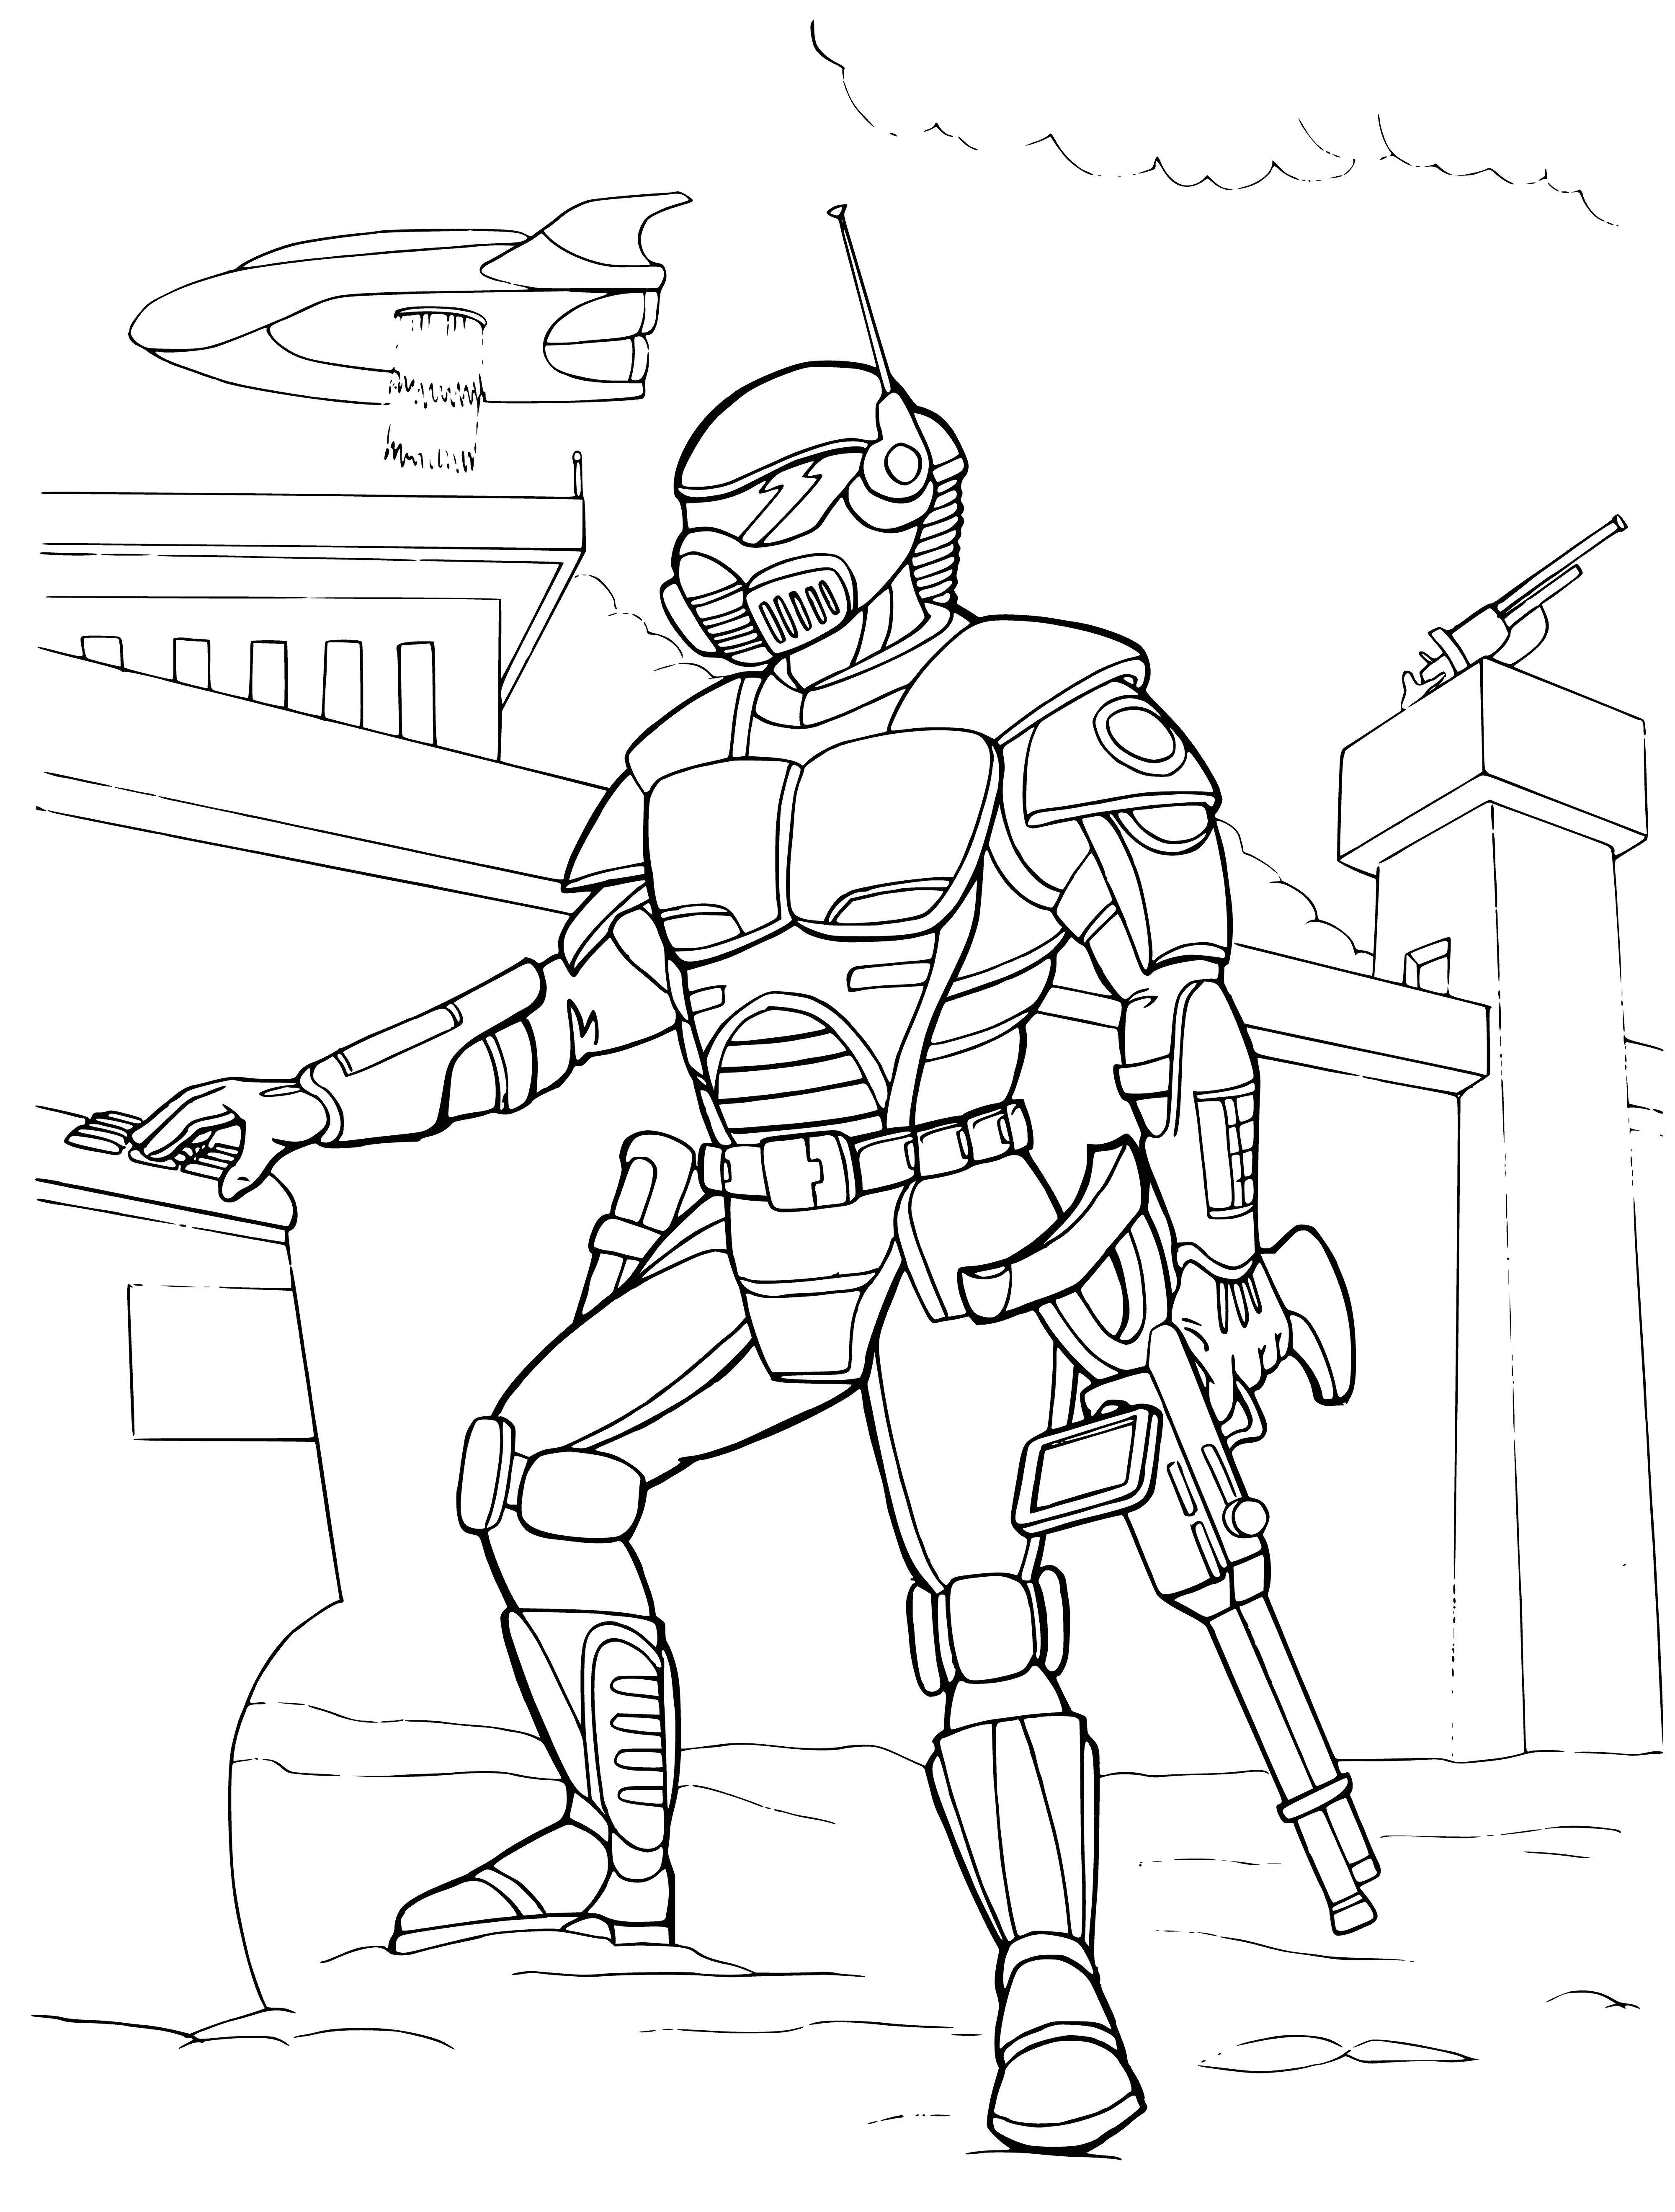 coloring page: Mercenary stands amidst ruin of battlefield, covered in blood, wielding sword. They continue to fight for profit from warfare's destruction.